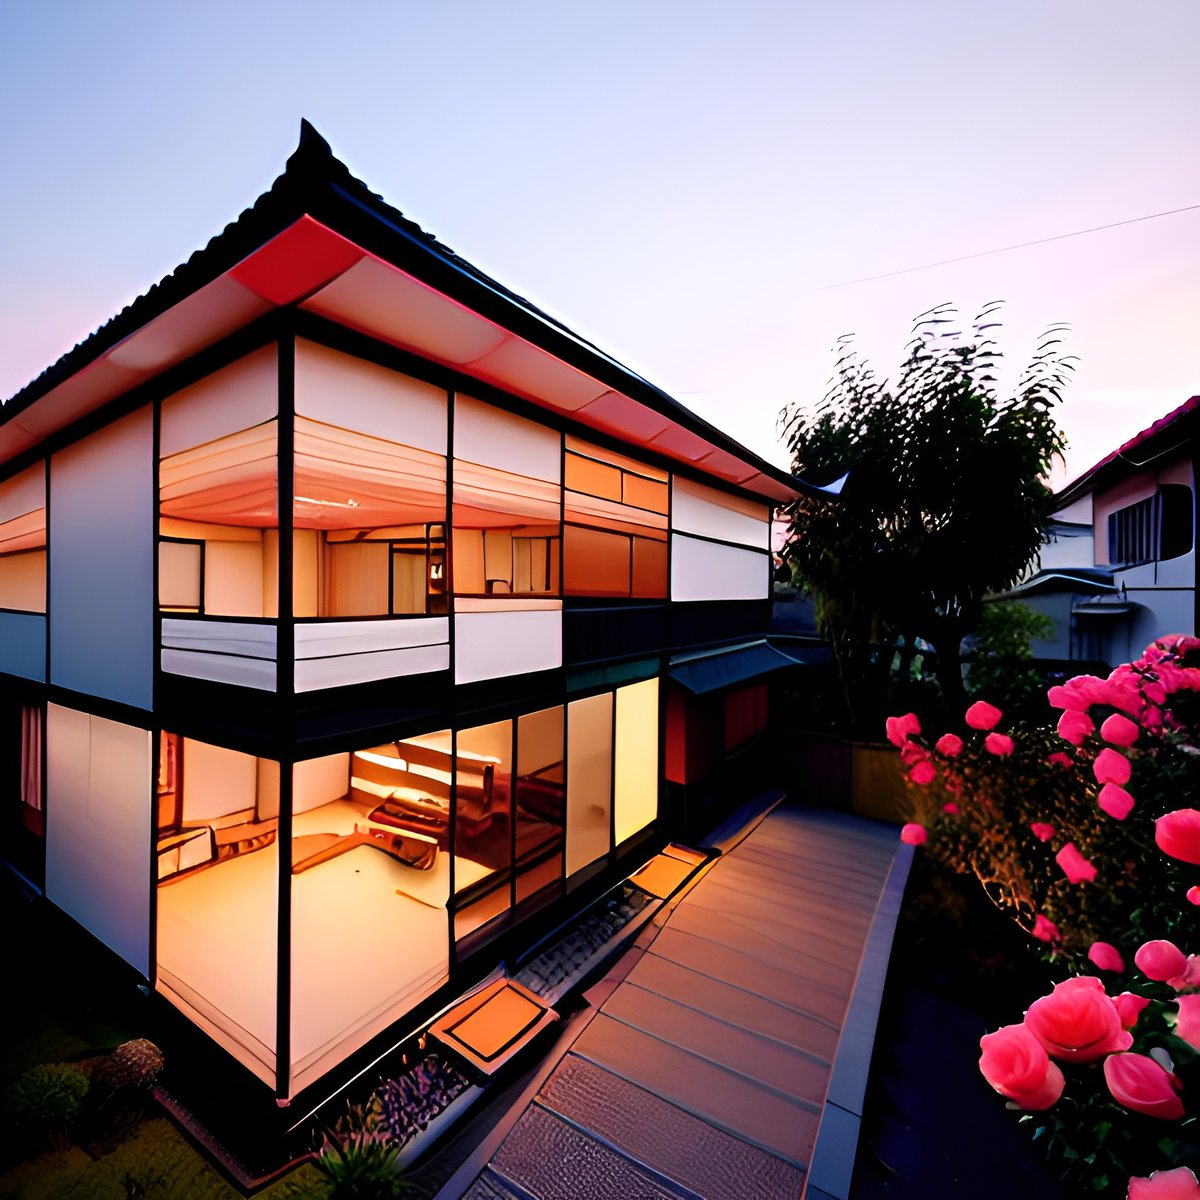 Looking for real estate investment opportunities? Japan's abundance of vacant homes has caught the attention of investors and homebuyers alike. jasonrosenbergrealestate.com/post/opportuni… #JapanRealEstate #RealEstateInvestment #VacantHomes #InvestmentOpportunities #JasonRosenbergRealEstate